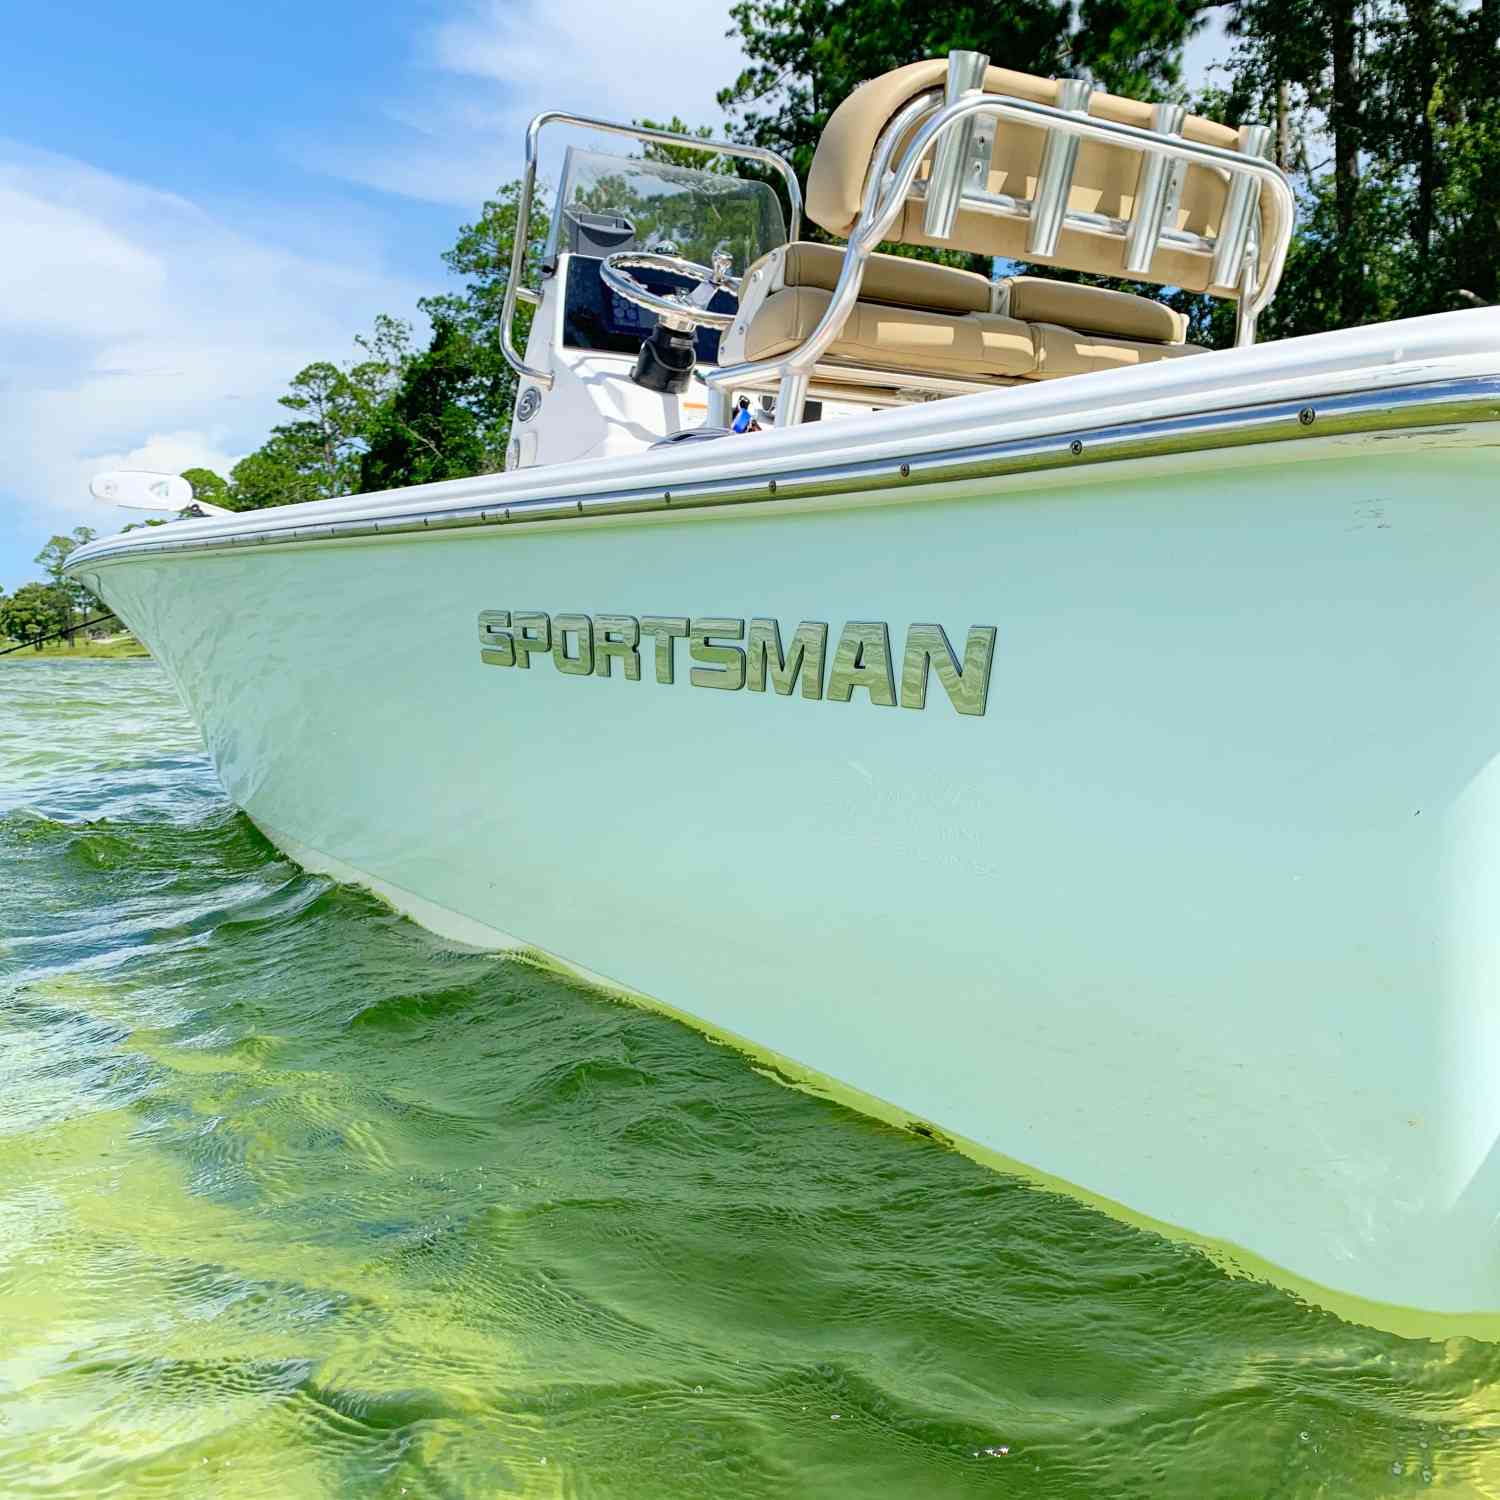 Title: Sportsman Masters 207 - On board their Sportsman Masters 207 Bay Boat - Location: Kingsley Lake, FL. Participating in the Photo Contest #SportsmanMay2020